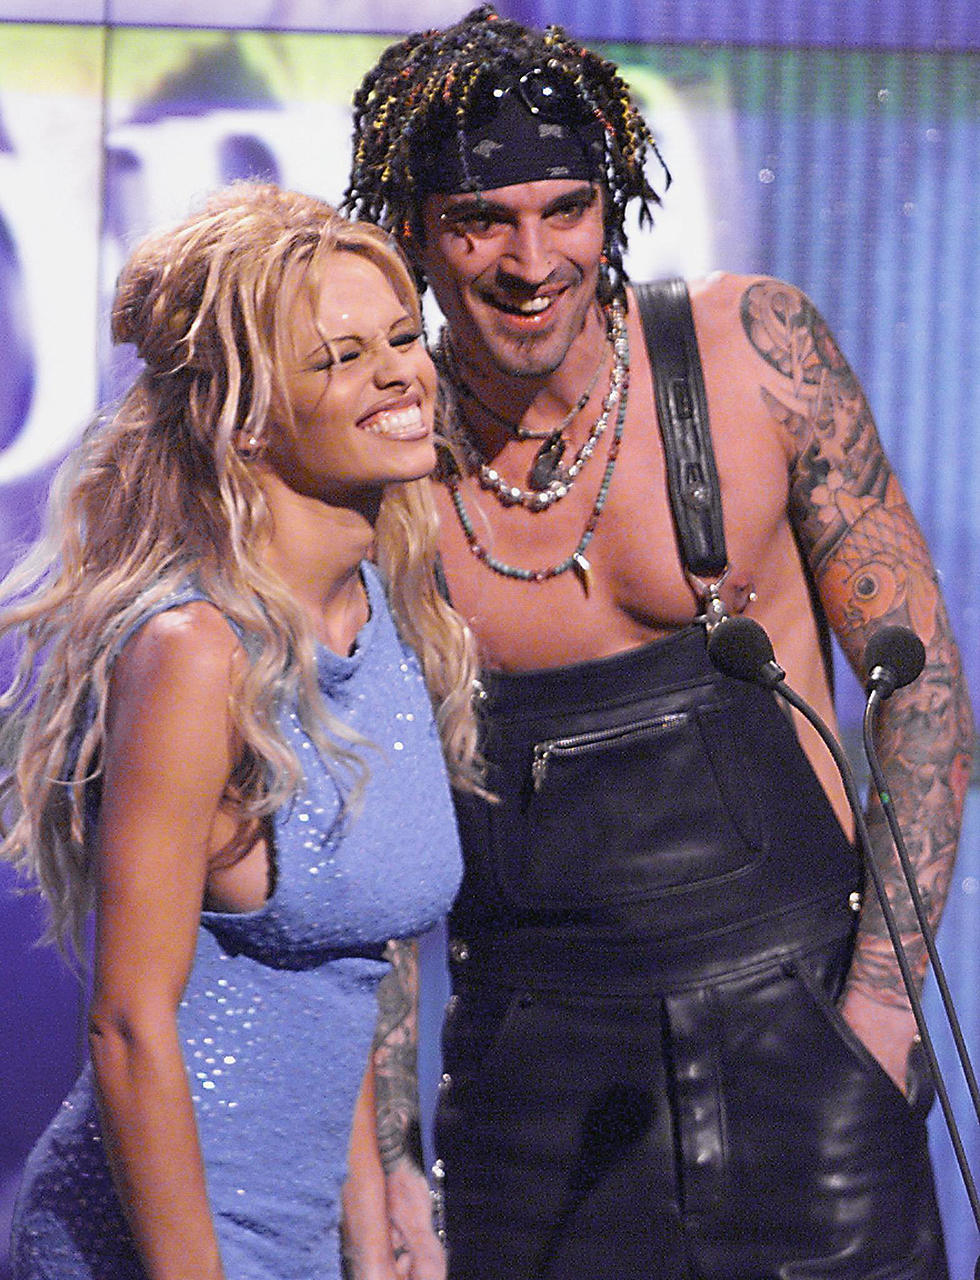 15 Years Ago: Tommy Lee Gets Punched by Kid Rock at the MTV VMAs